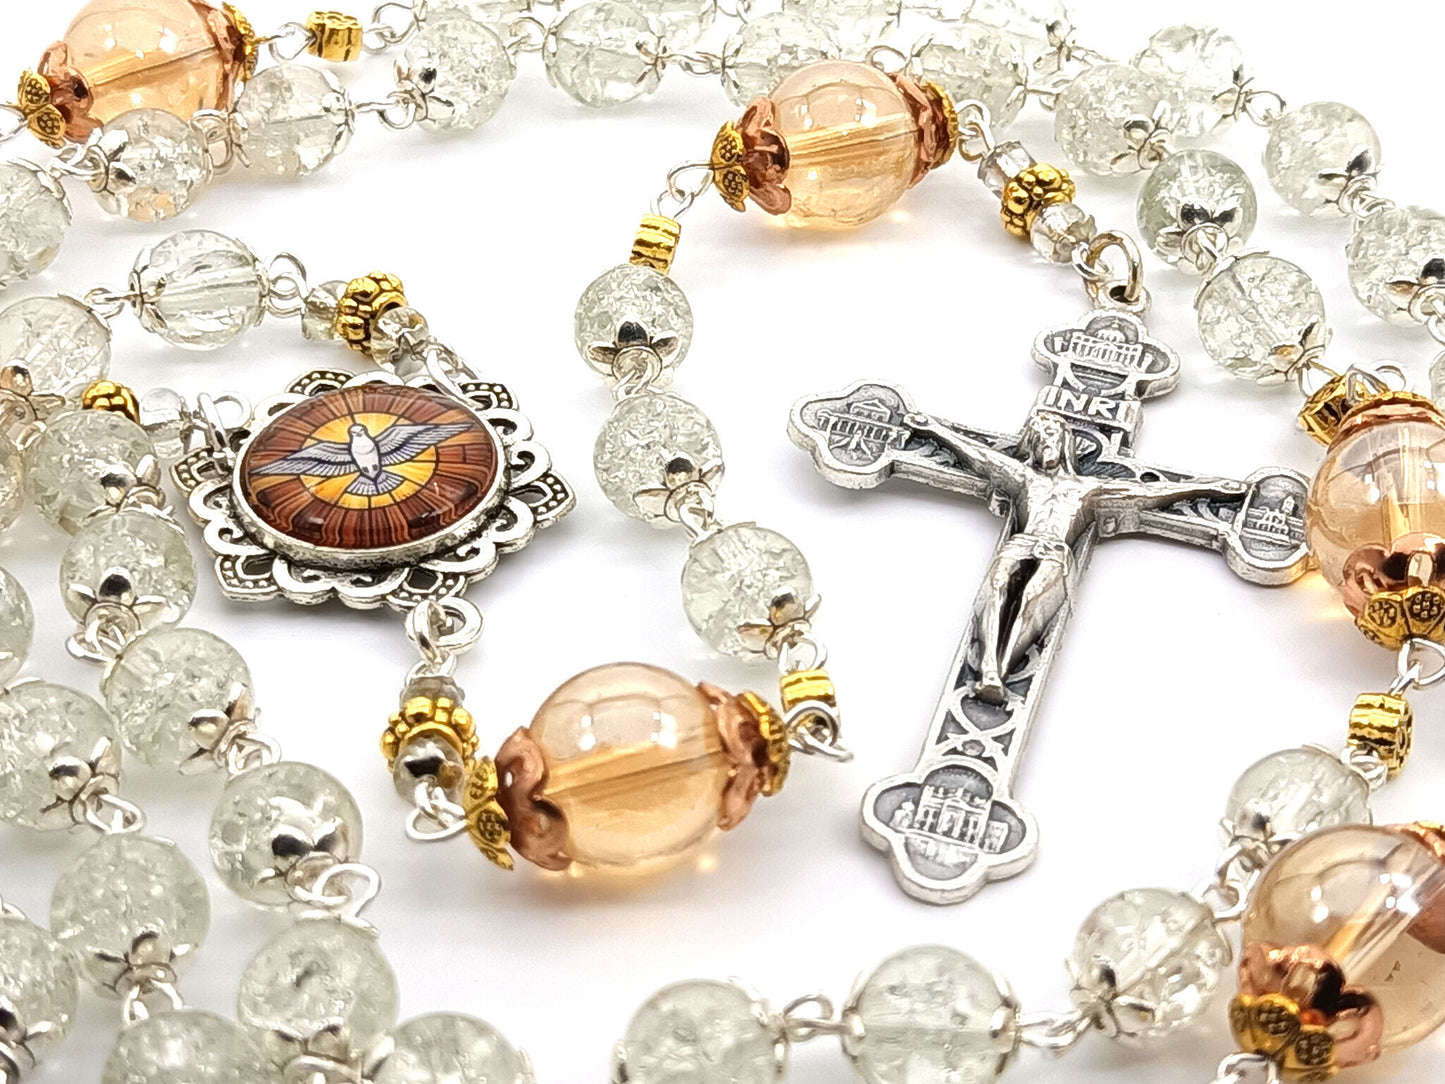 Confirmation unique rosary beads with clear and copper glass beads, Four Basilicas crucifix and silver picture Holy Spirit centre medal.